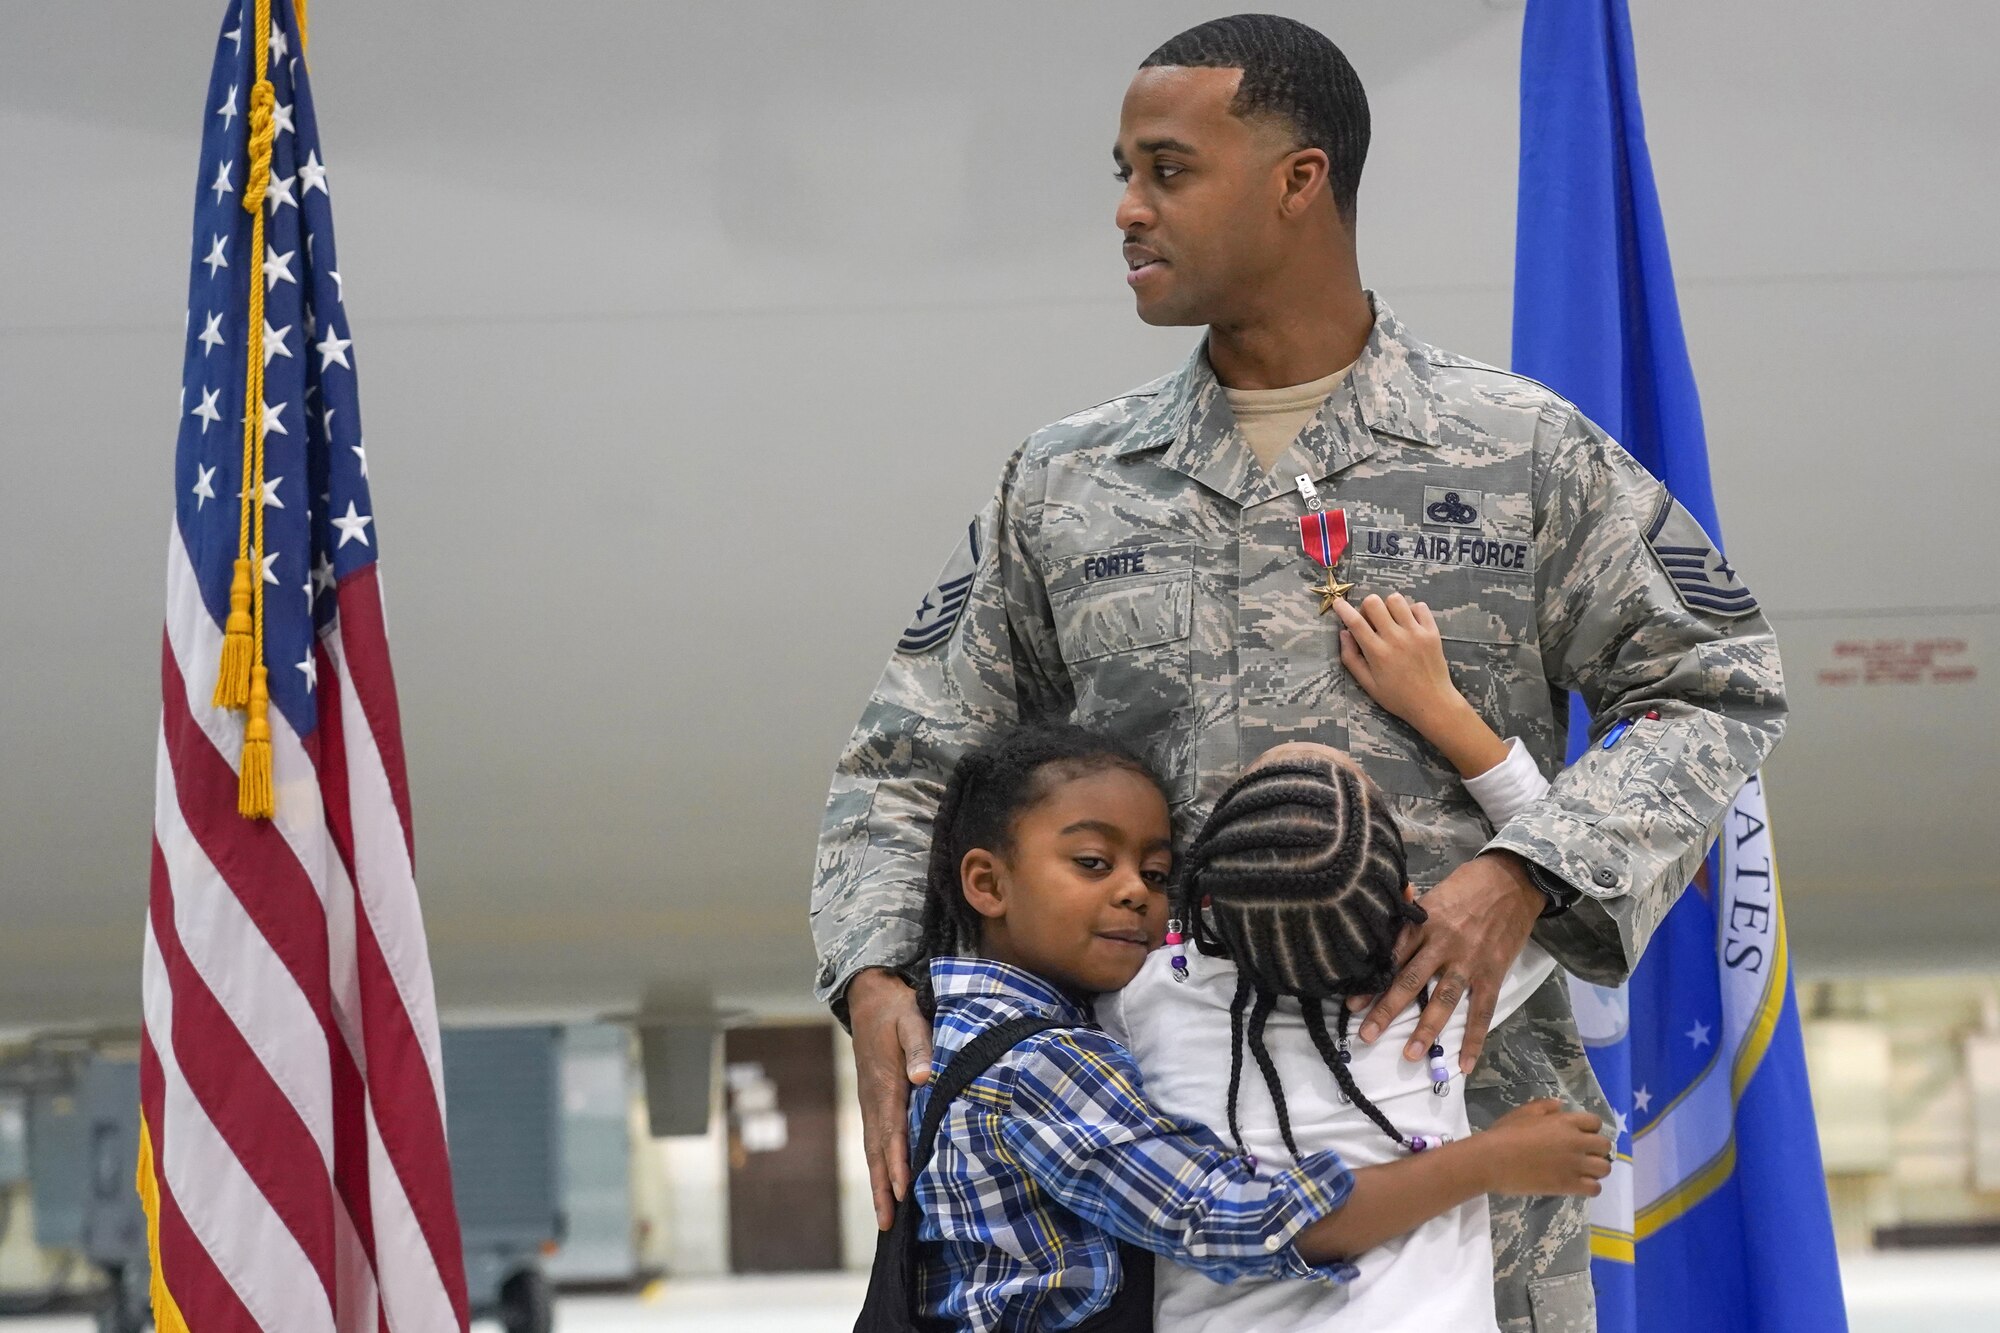 Master Sgt. and his children during a ceremony awarding him the Bronze Star Medal